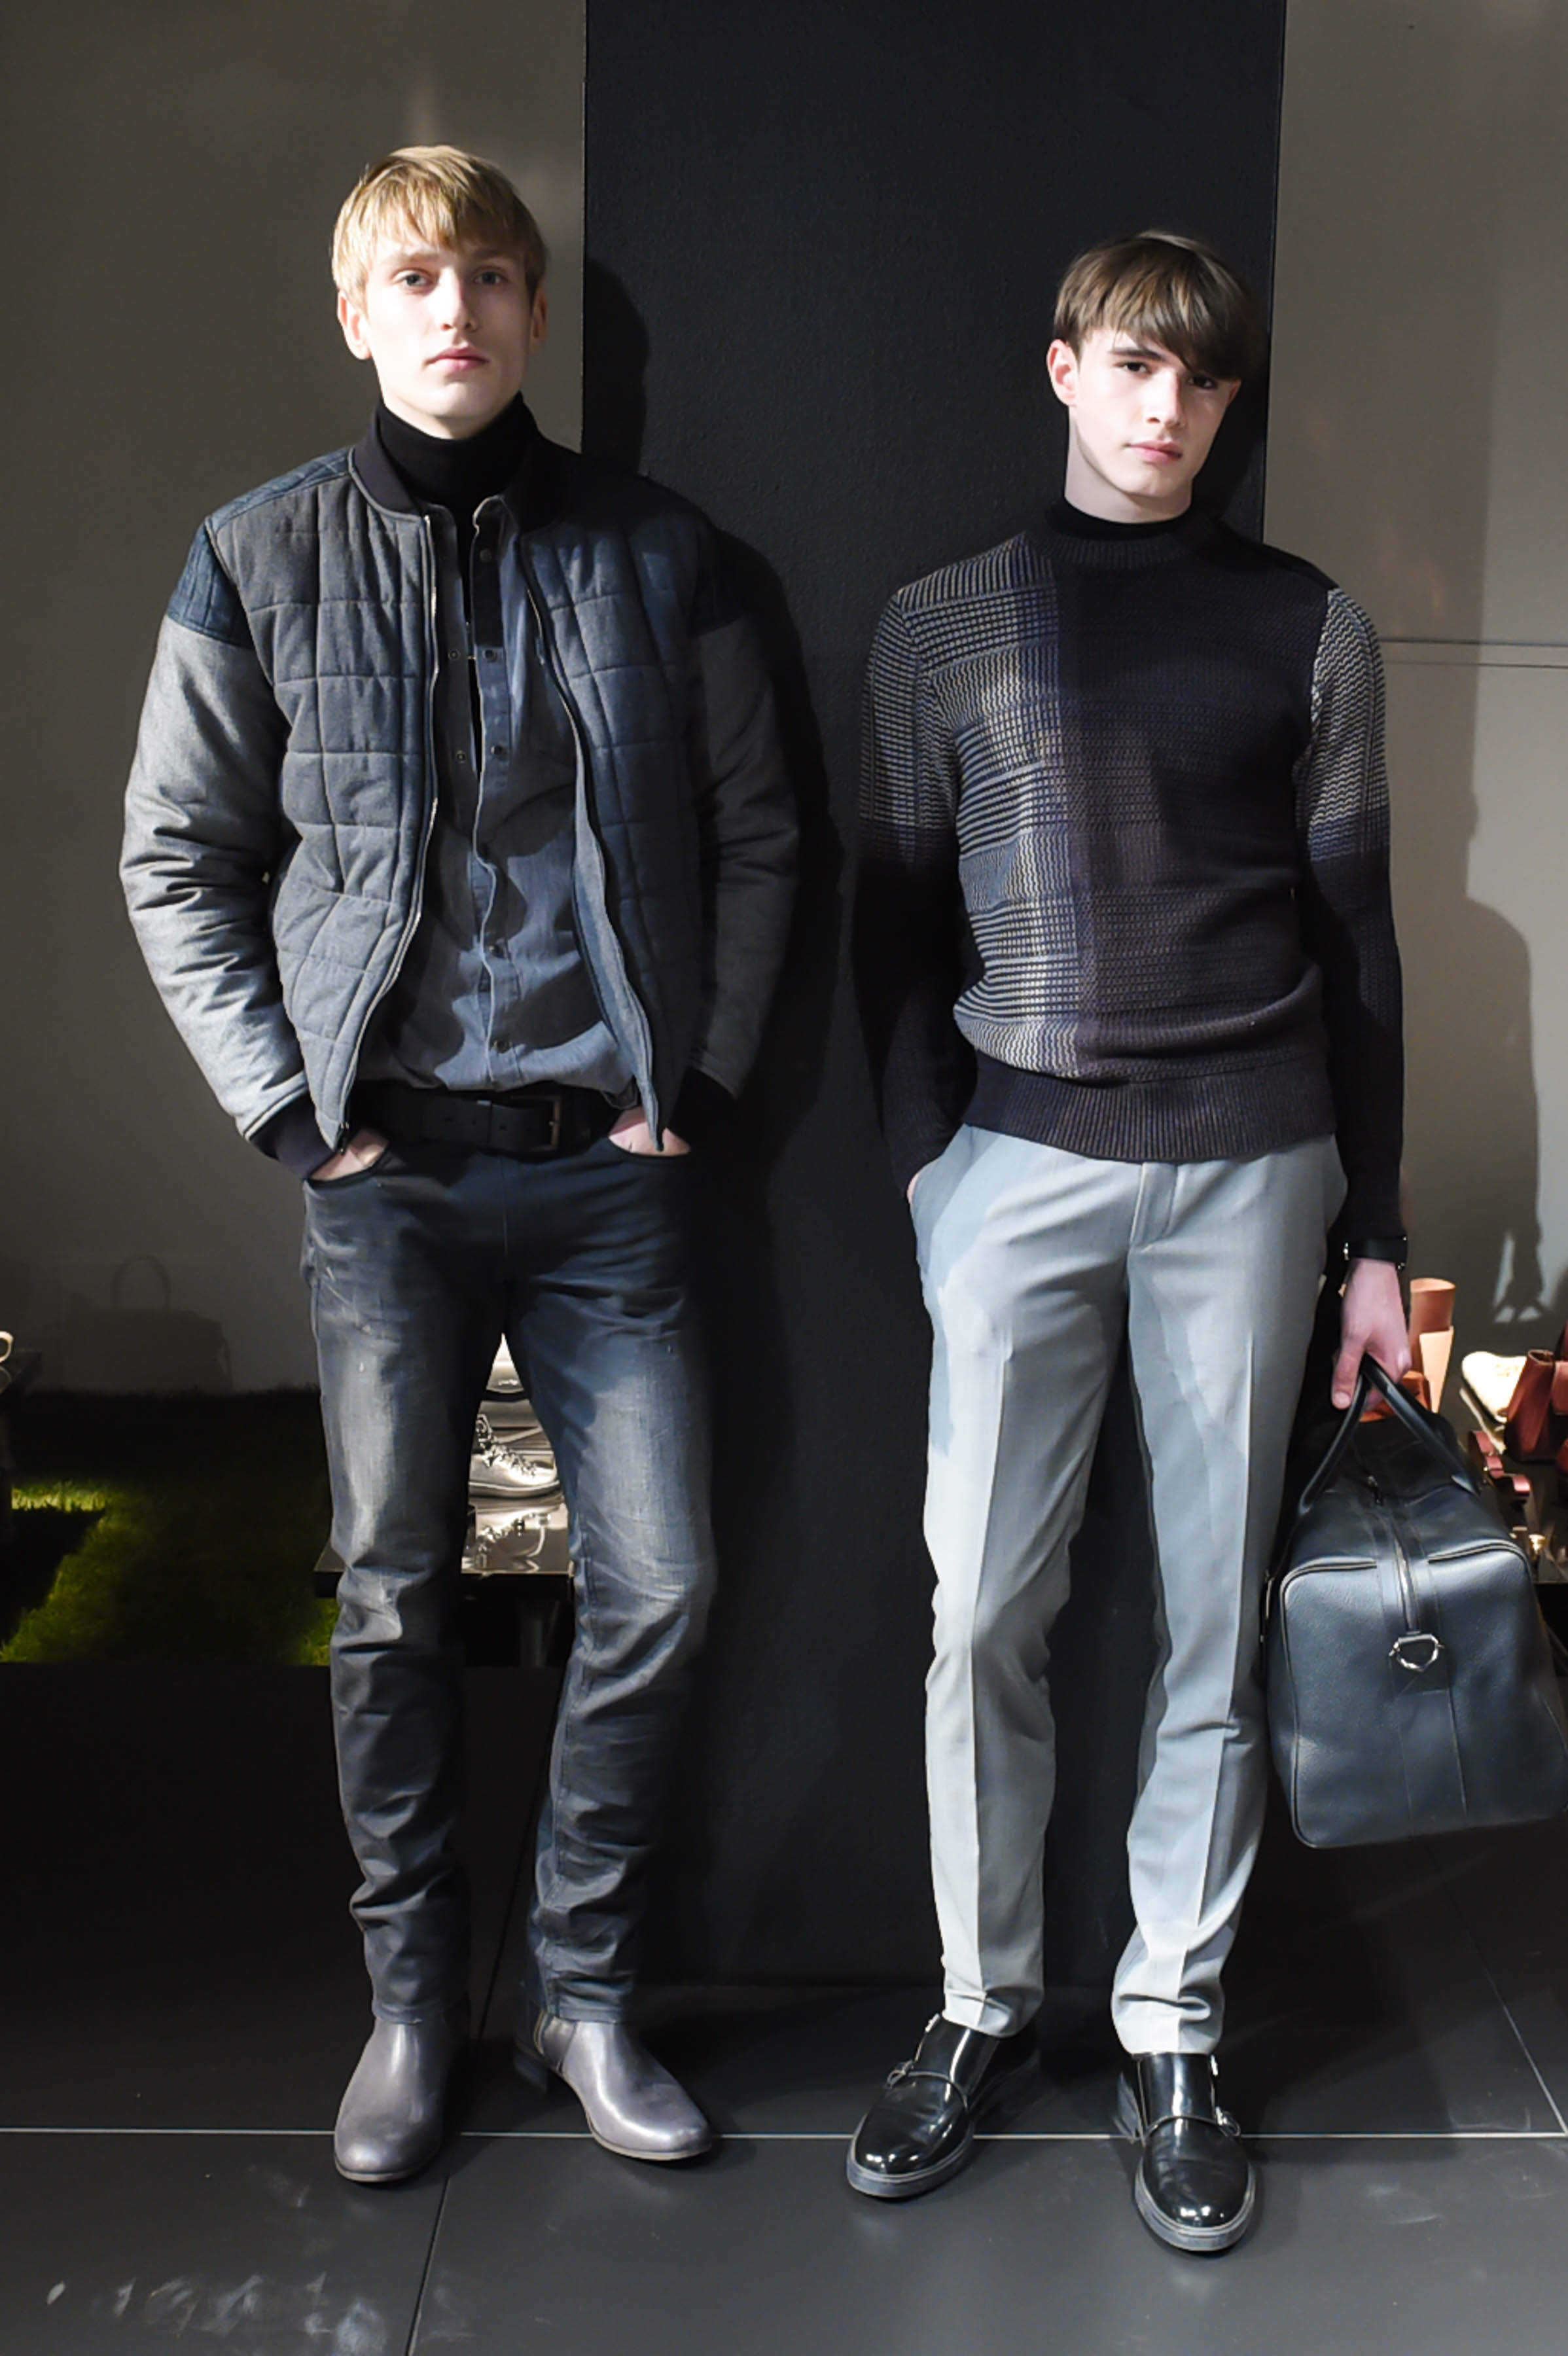 CALVIN KLEIN Presents Fall 2015 Men's and Women's Lines, NYC